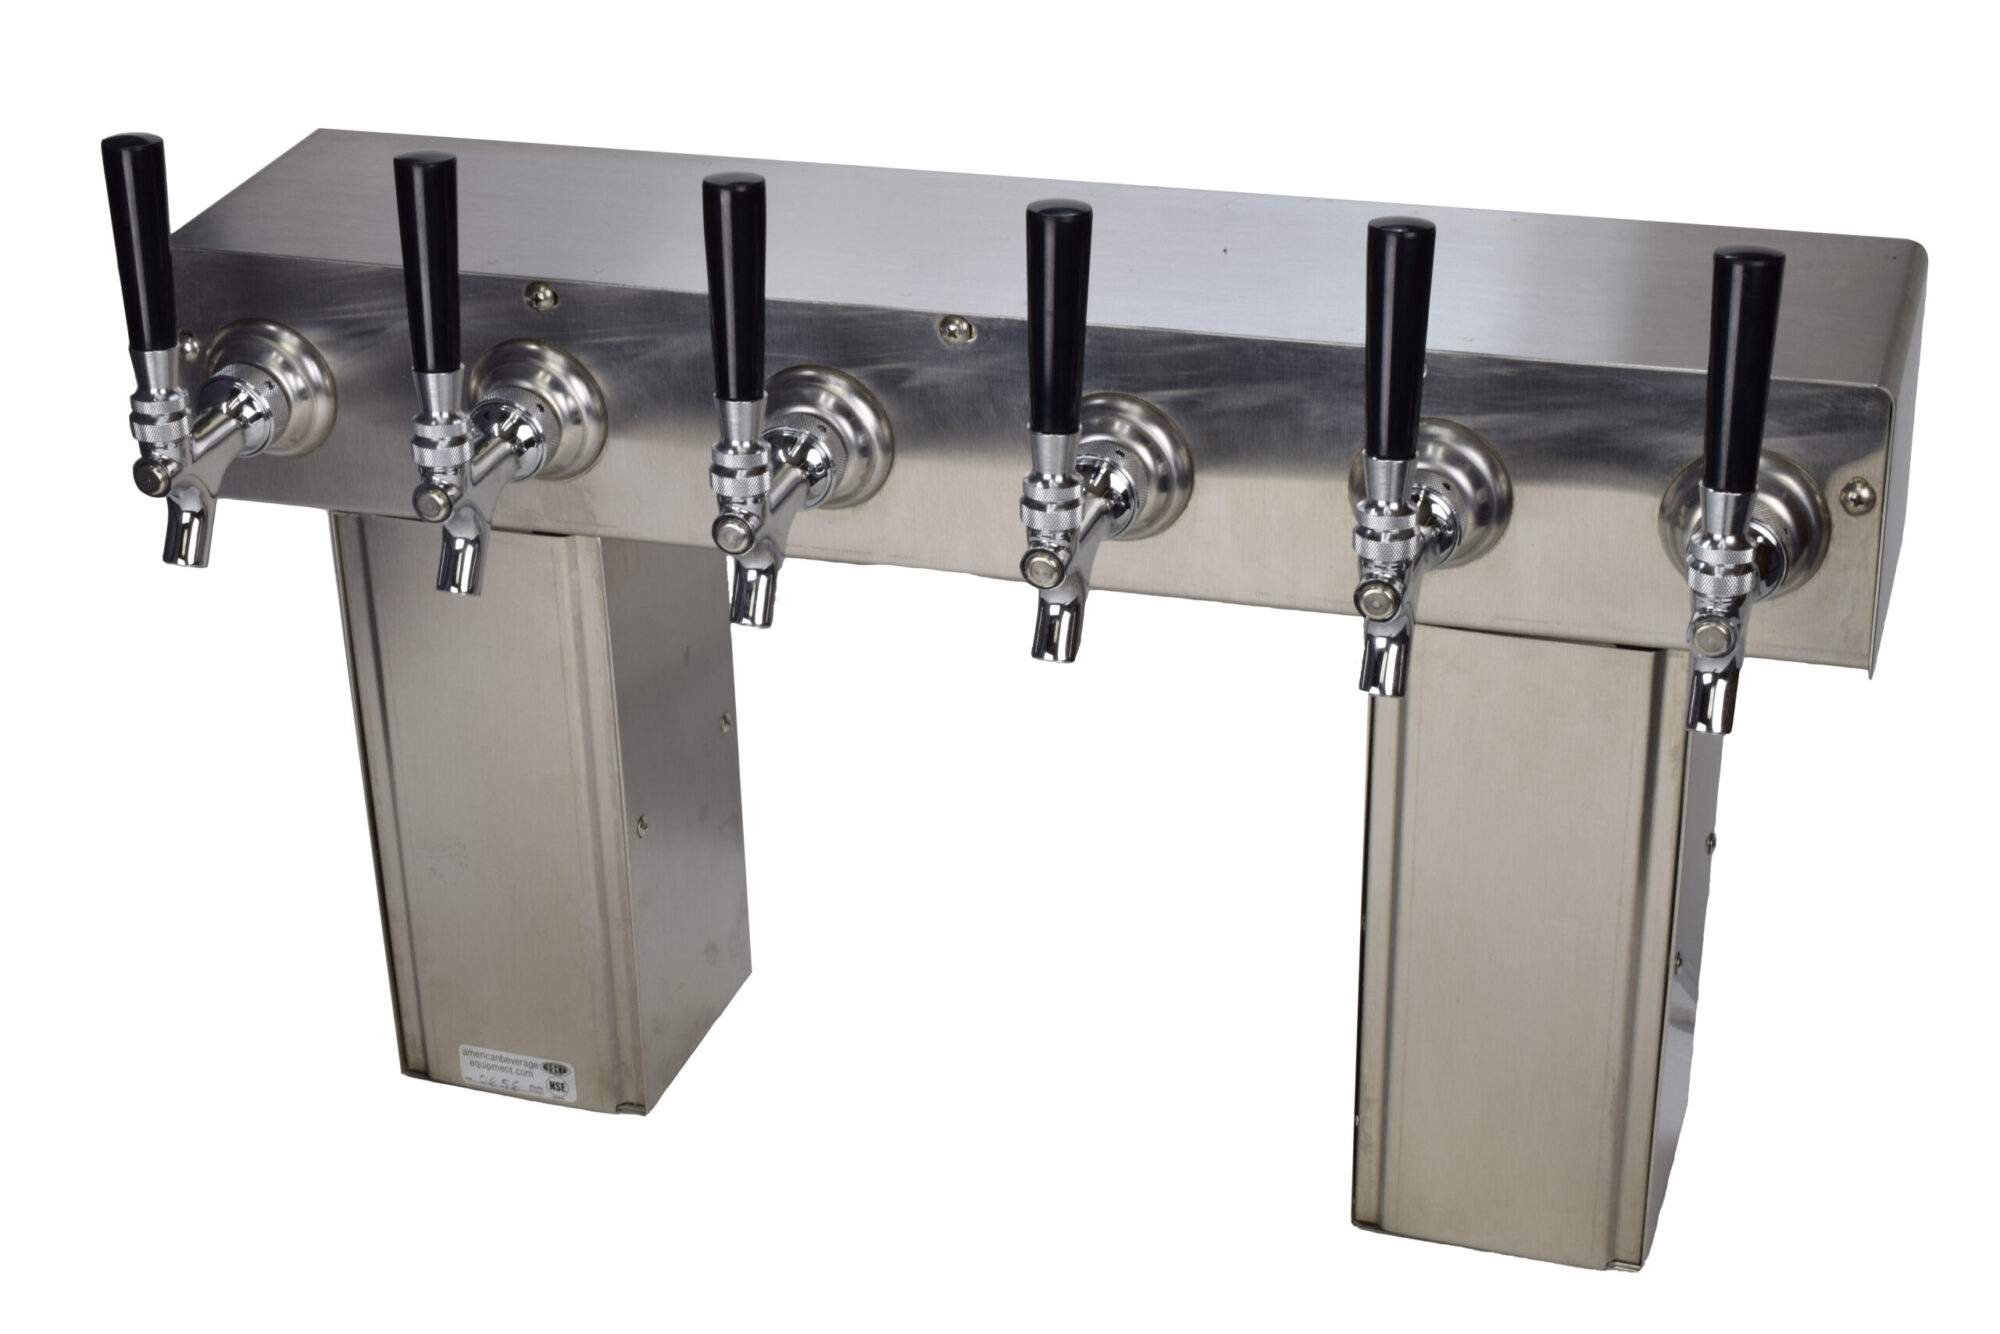 656NG-SS Six Faucet Pass Through Tower with Square Bases - Stainless Steel Faucets and Shanks - Non NSF and Glycol Ready